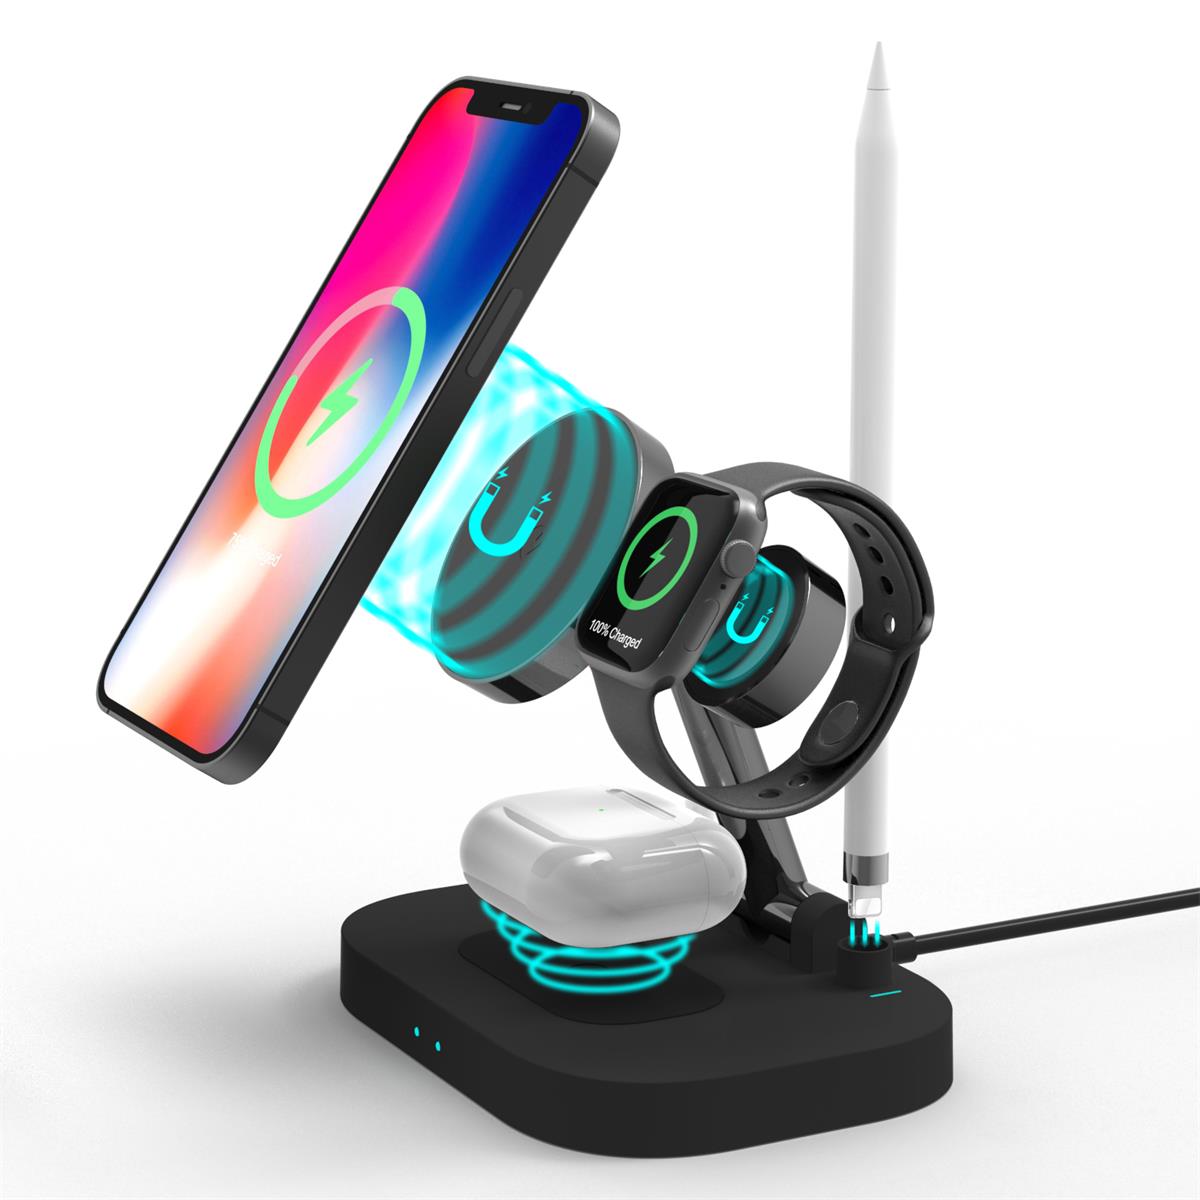 New model Foldable Multifuction Wireless charger: Charging Stands, iPhone Docks, and More